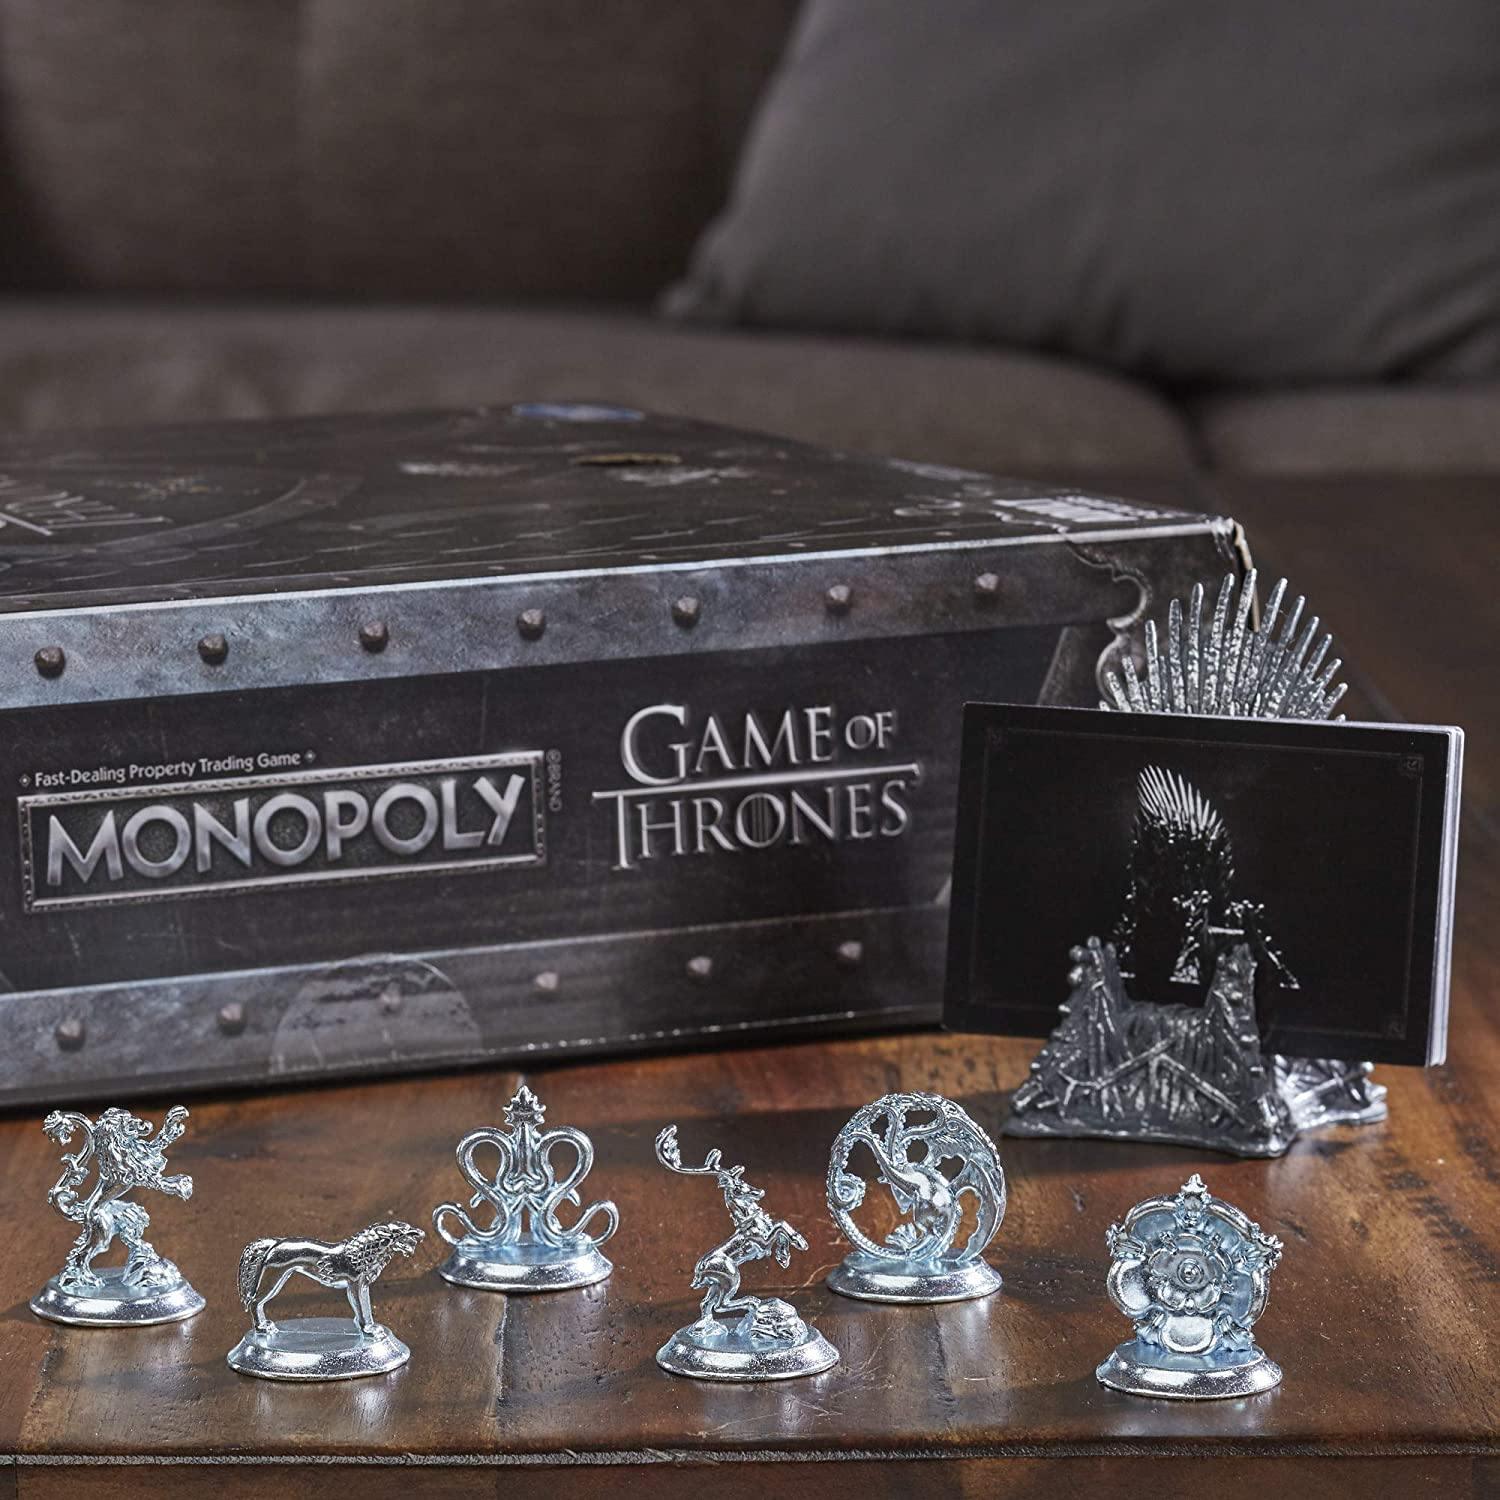 Monopoly Game of Thrones Board Game for Adults with music - BumbleToys - 14 Years & Up, Amazon, Boys, Card & Board Games, Monopoly, Pre-Order, Puzzle & Board & Card Games